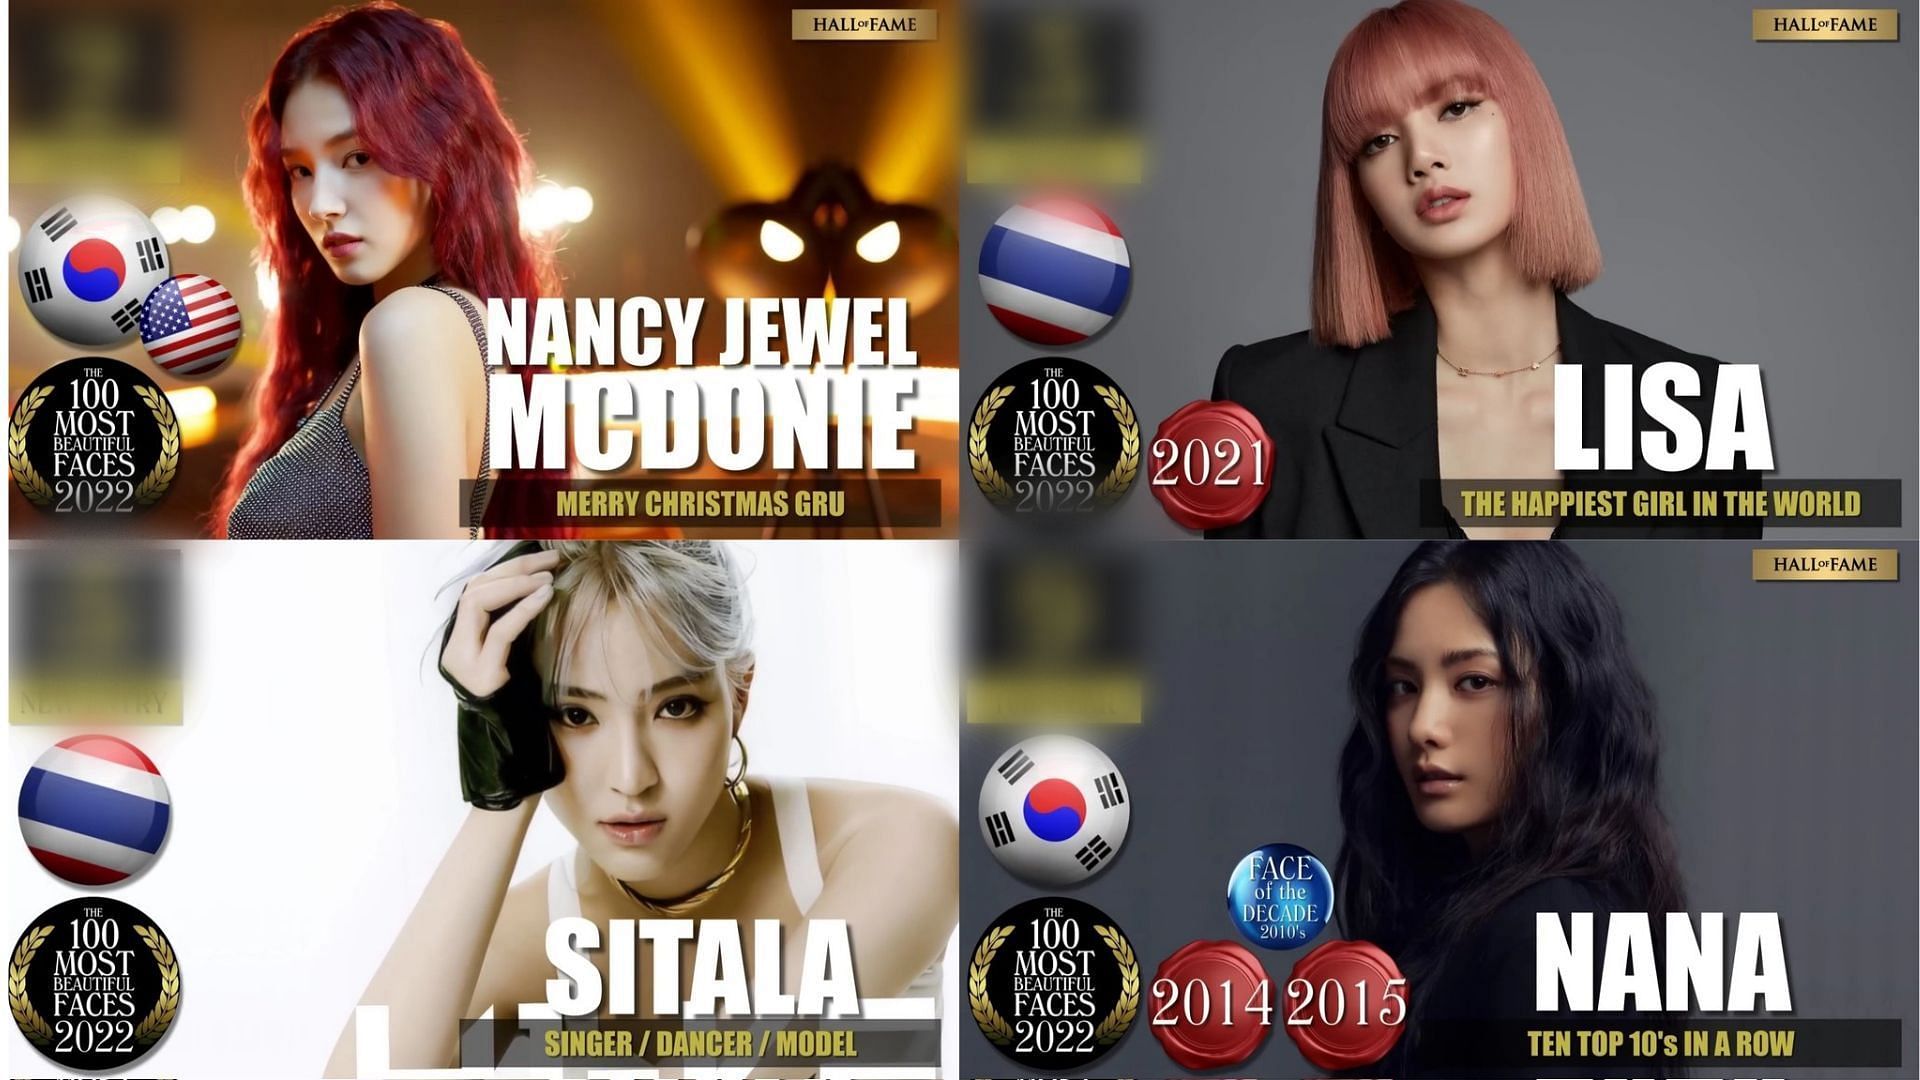 Top 10 Kpop idols in TC Candler's 100 Most Beautiful Faces of 2022